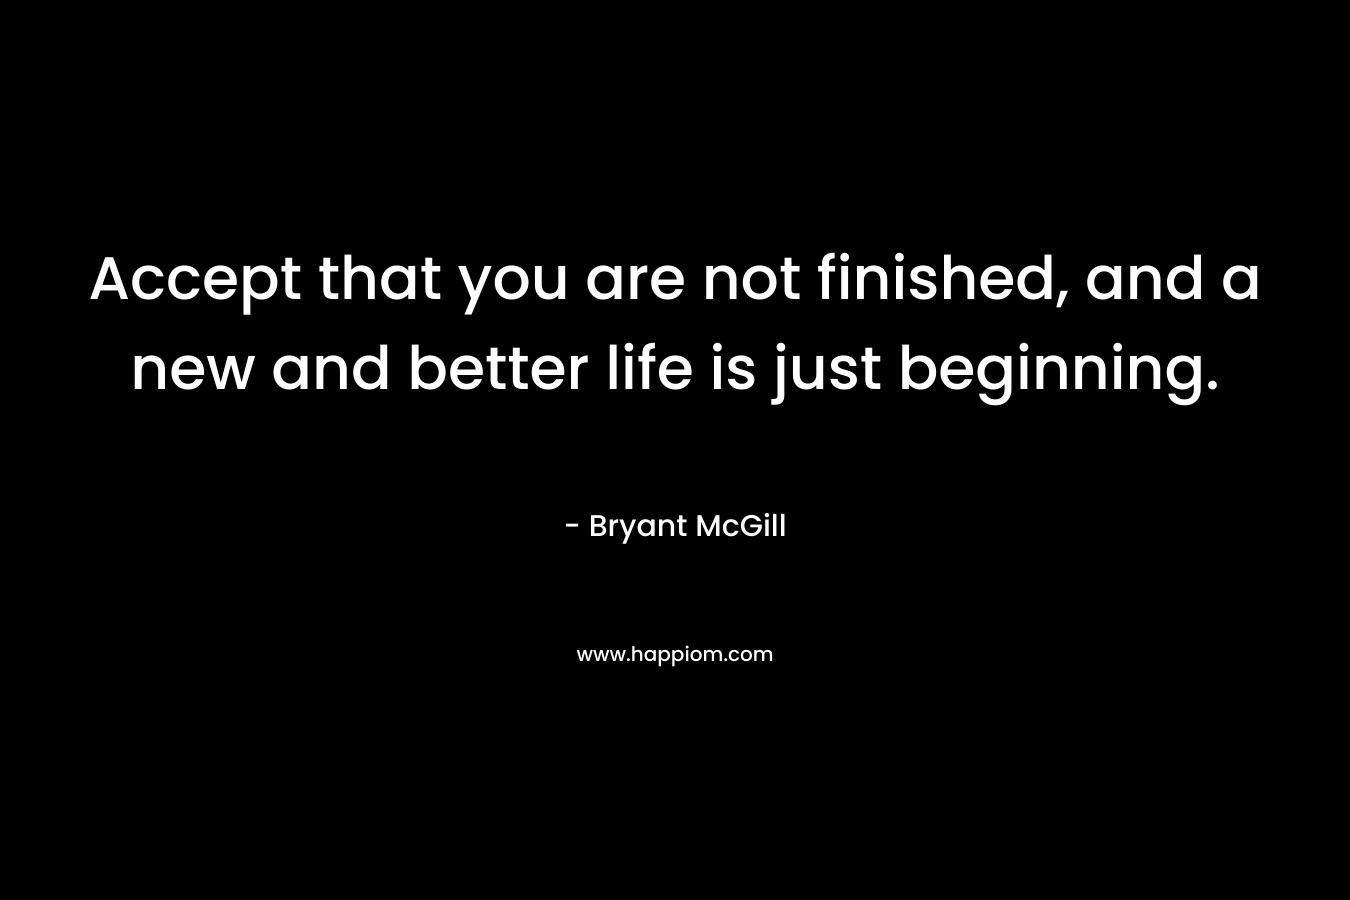 Accept that you are not finished, and a new and better life is just beginning.